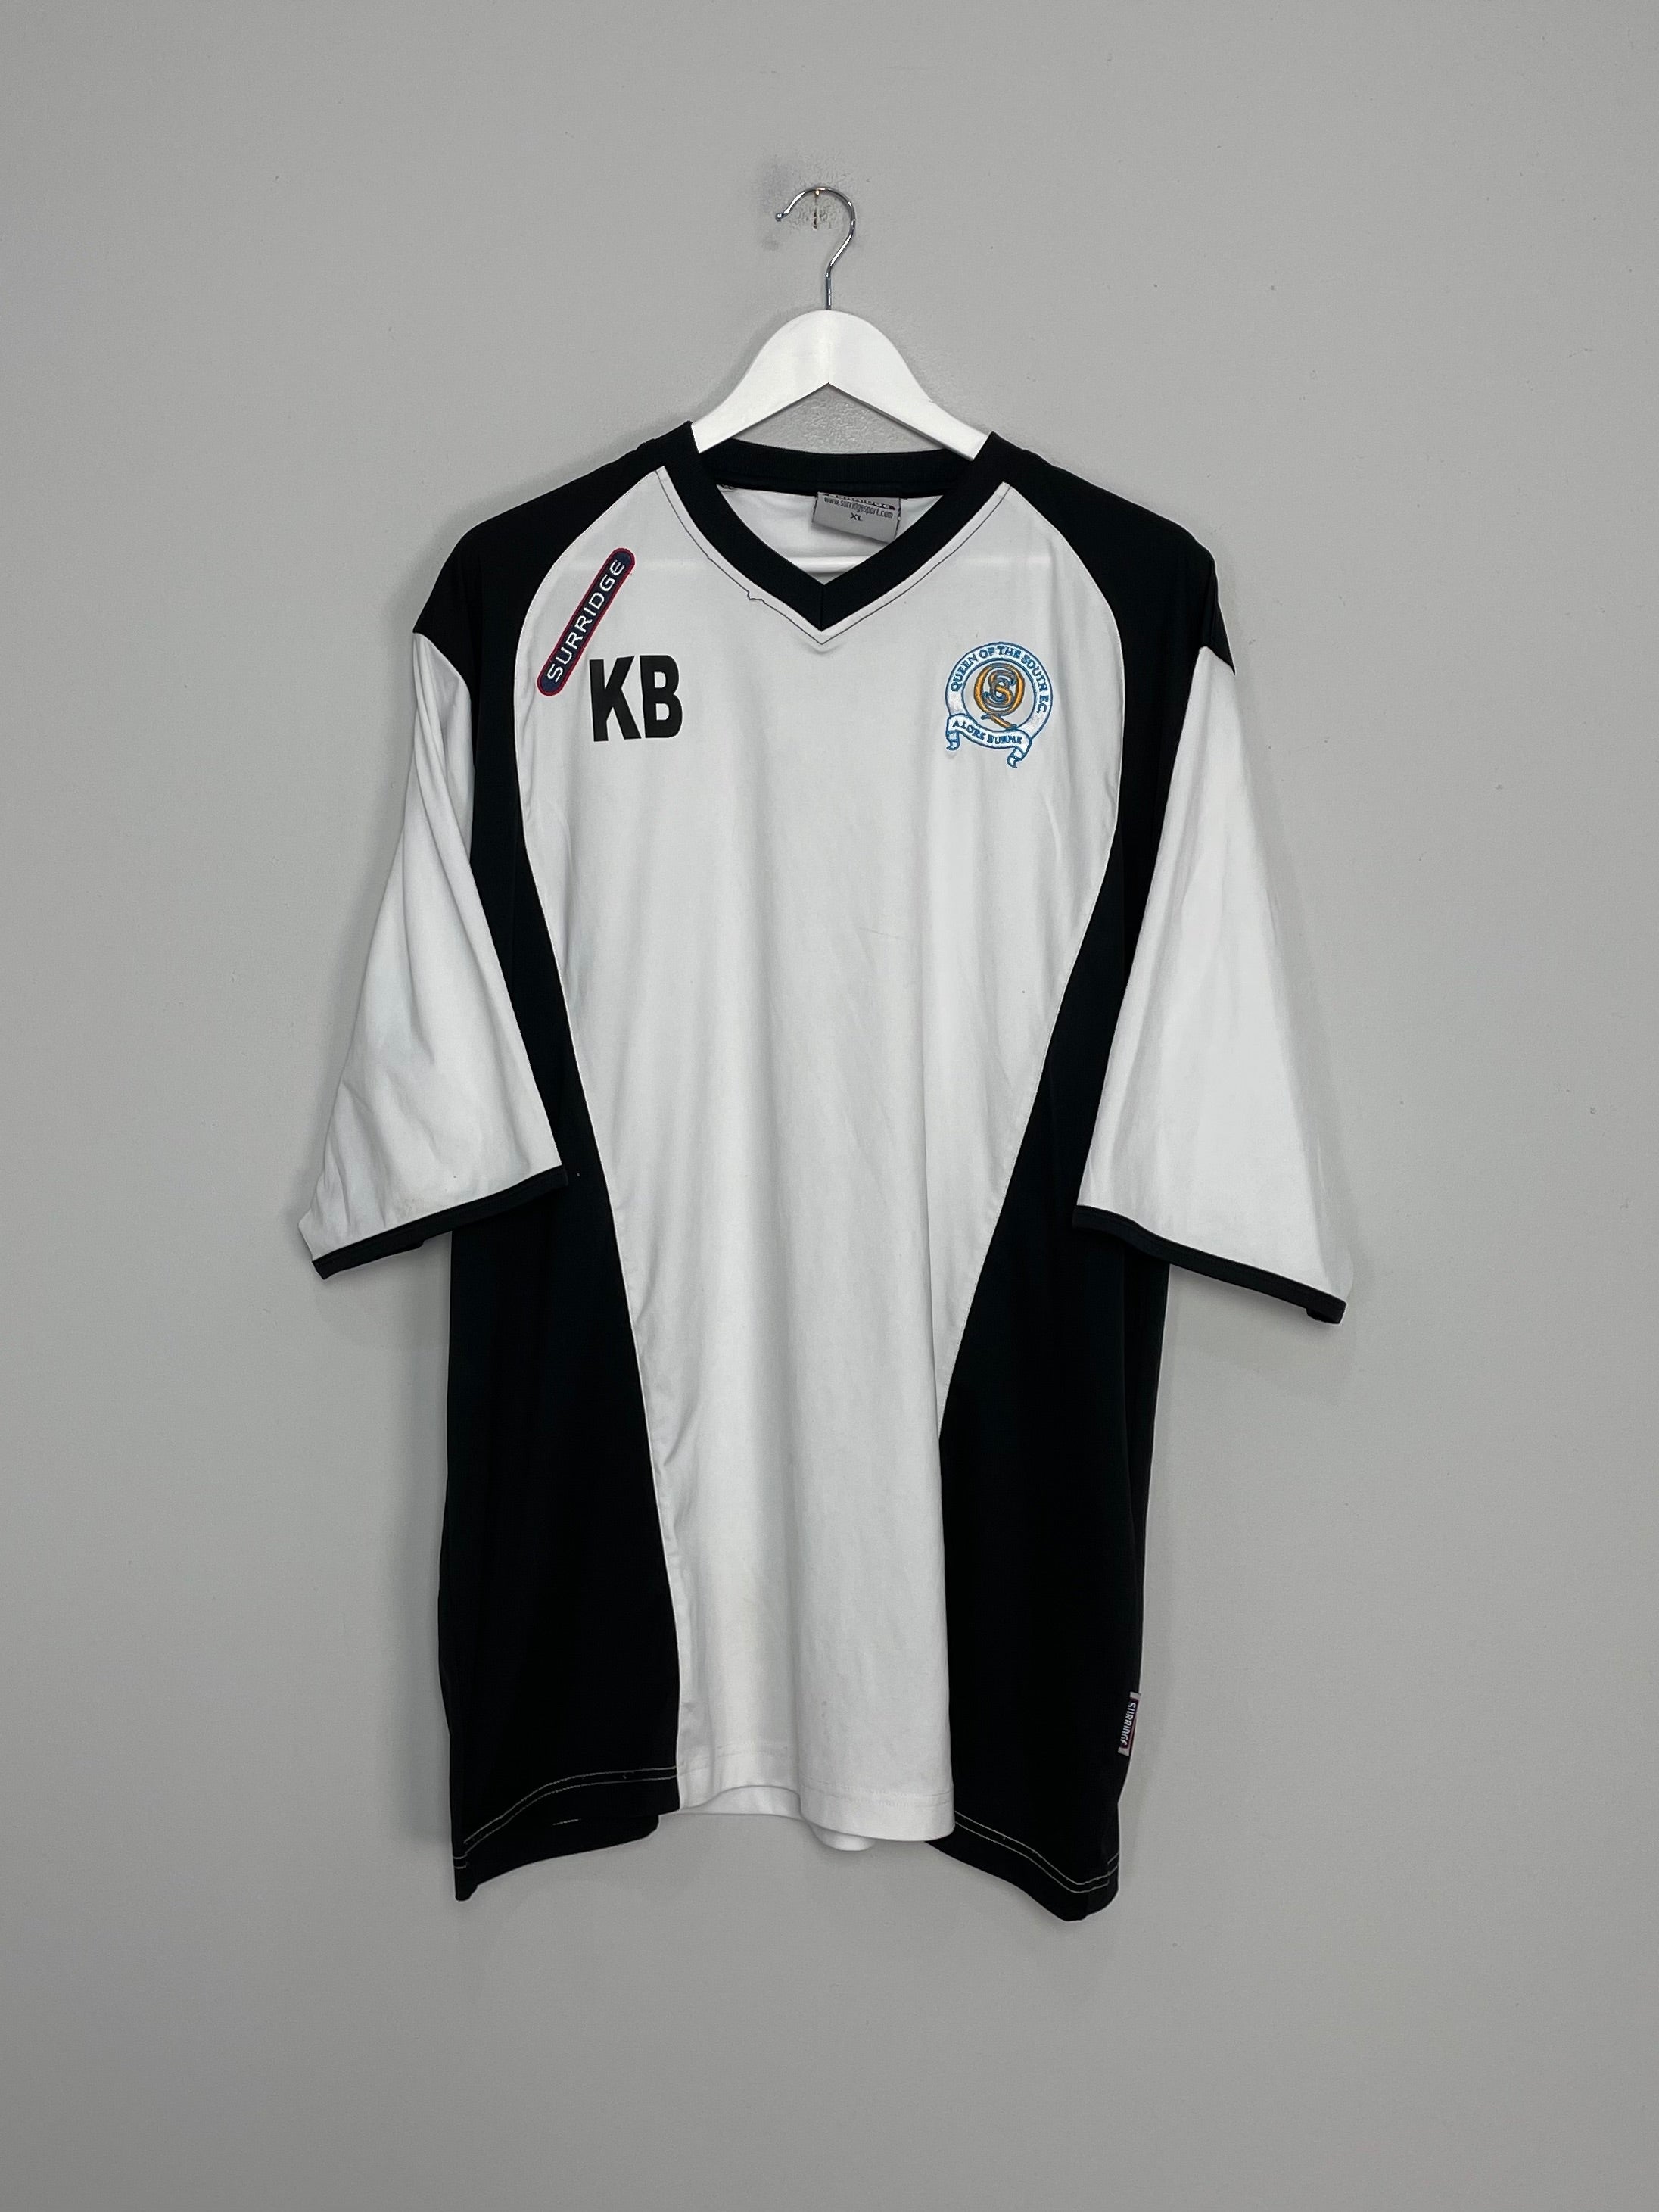 2007/08 QUEEN OF THE SOUTH *STAFF ISSUE* TRAINING SHIRT (XL) SURRIDGE